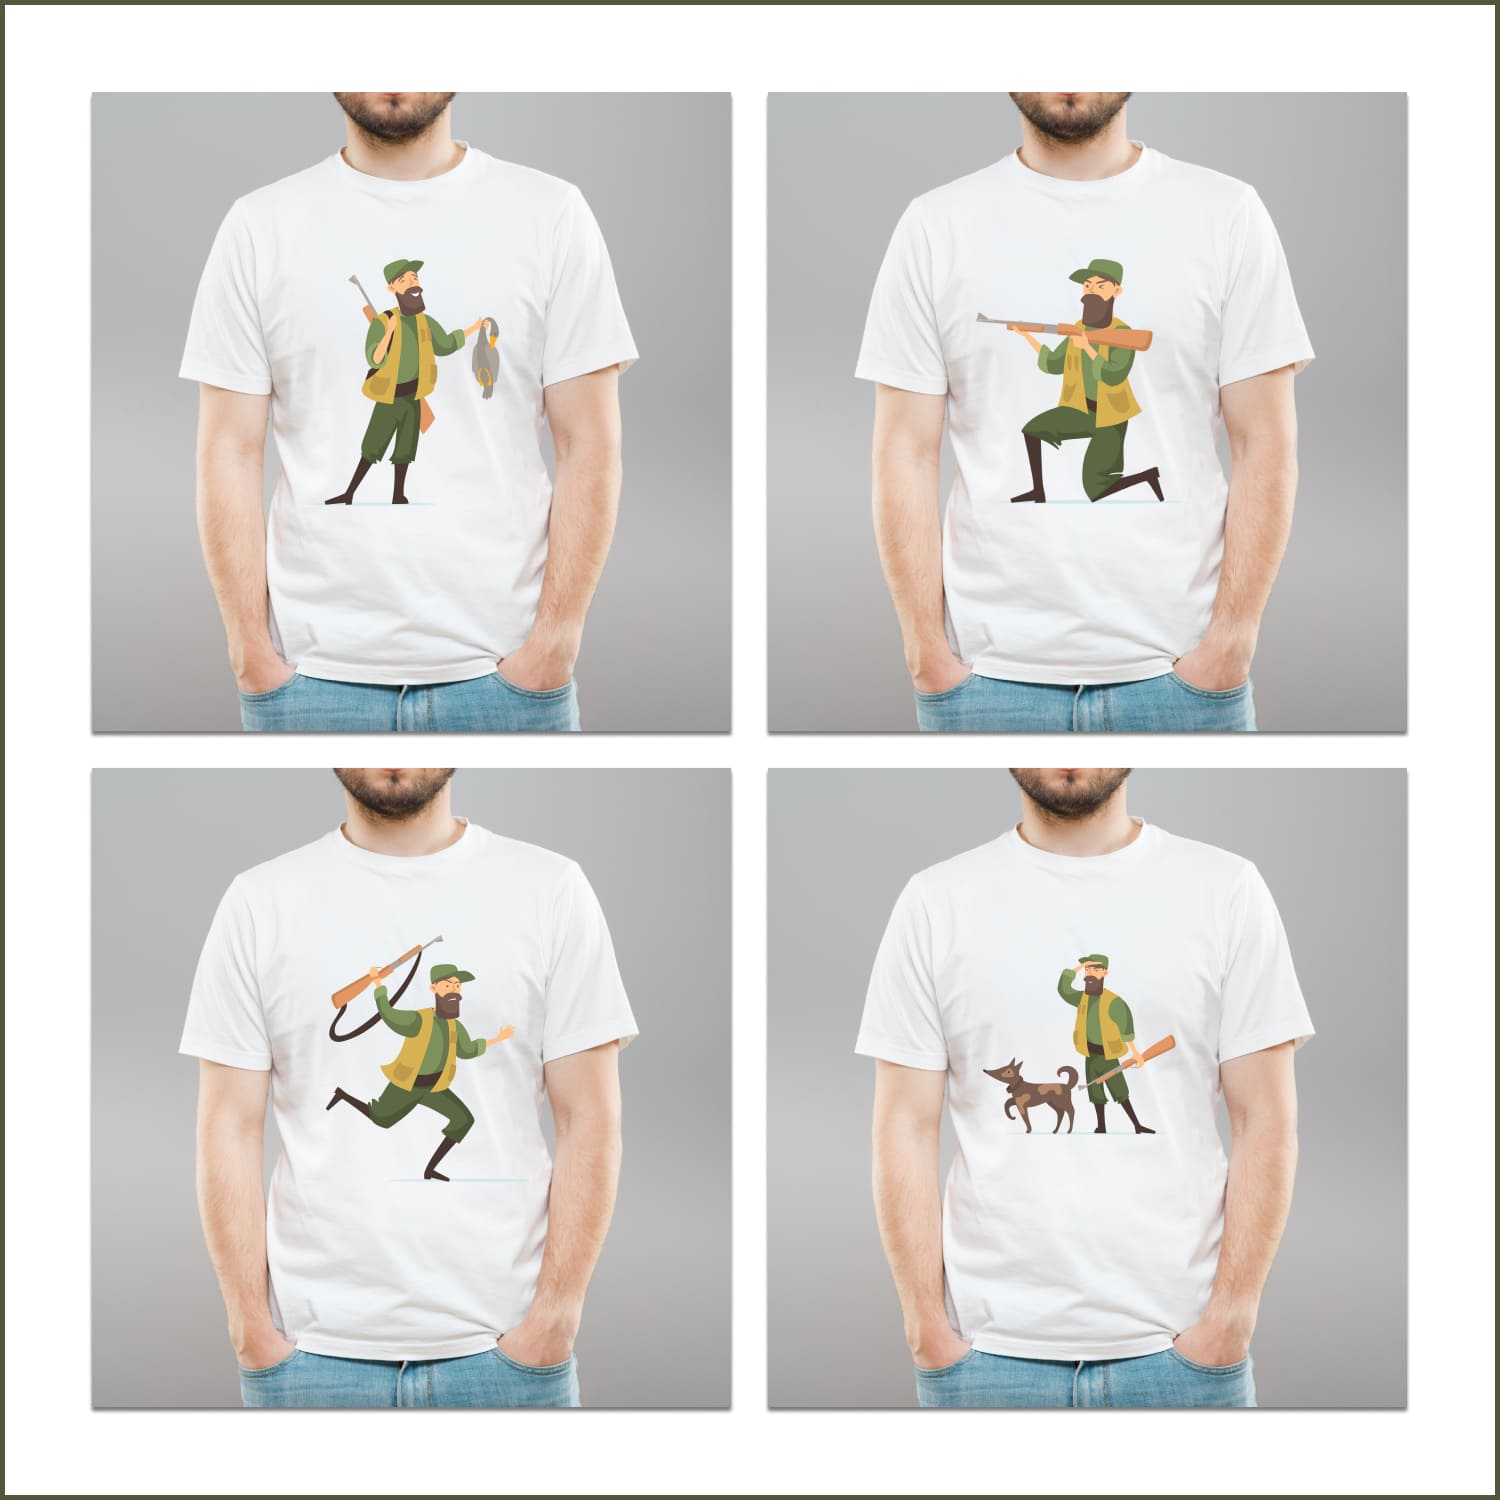 A selection of images of T-shirts with unique duck hunter prints.